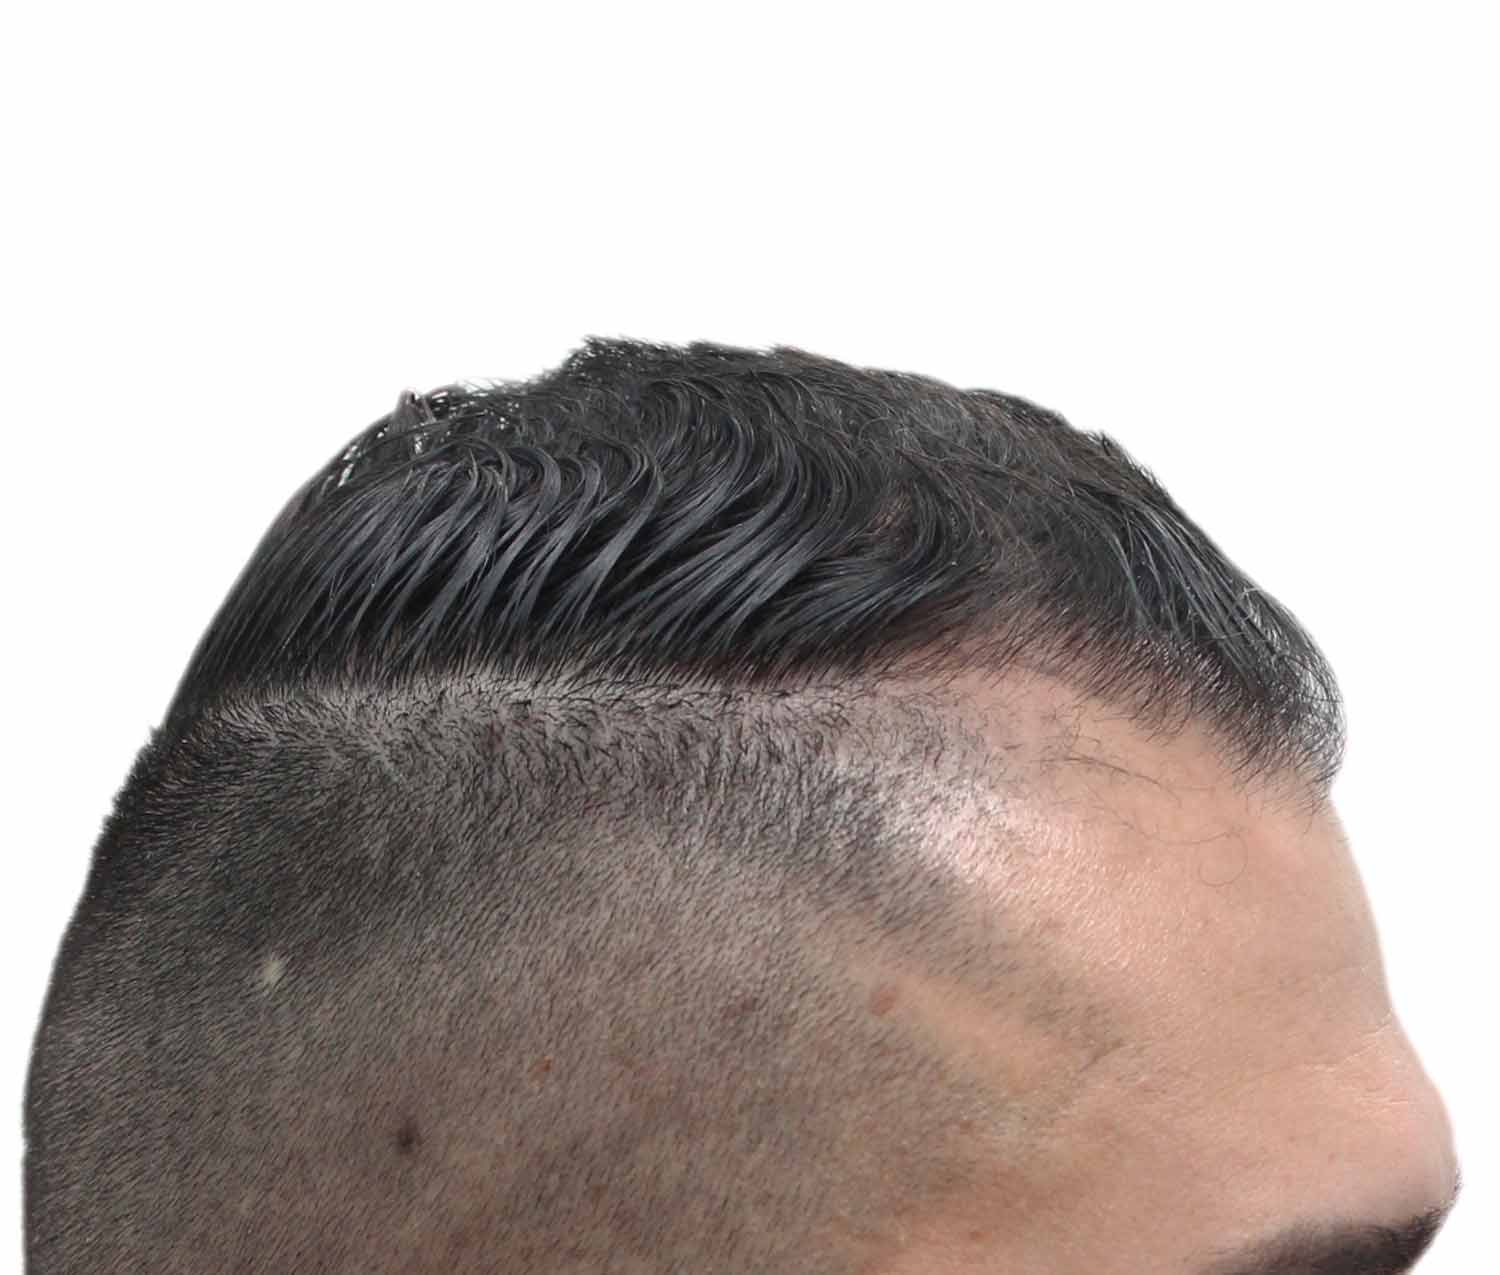 a close up of a man 's head with a shaved head